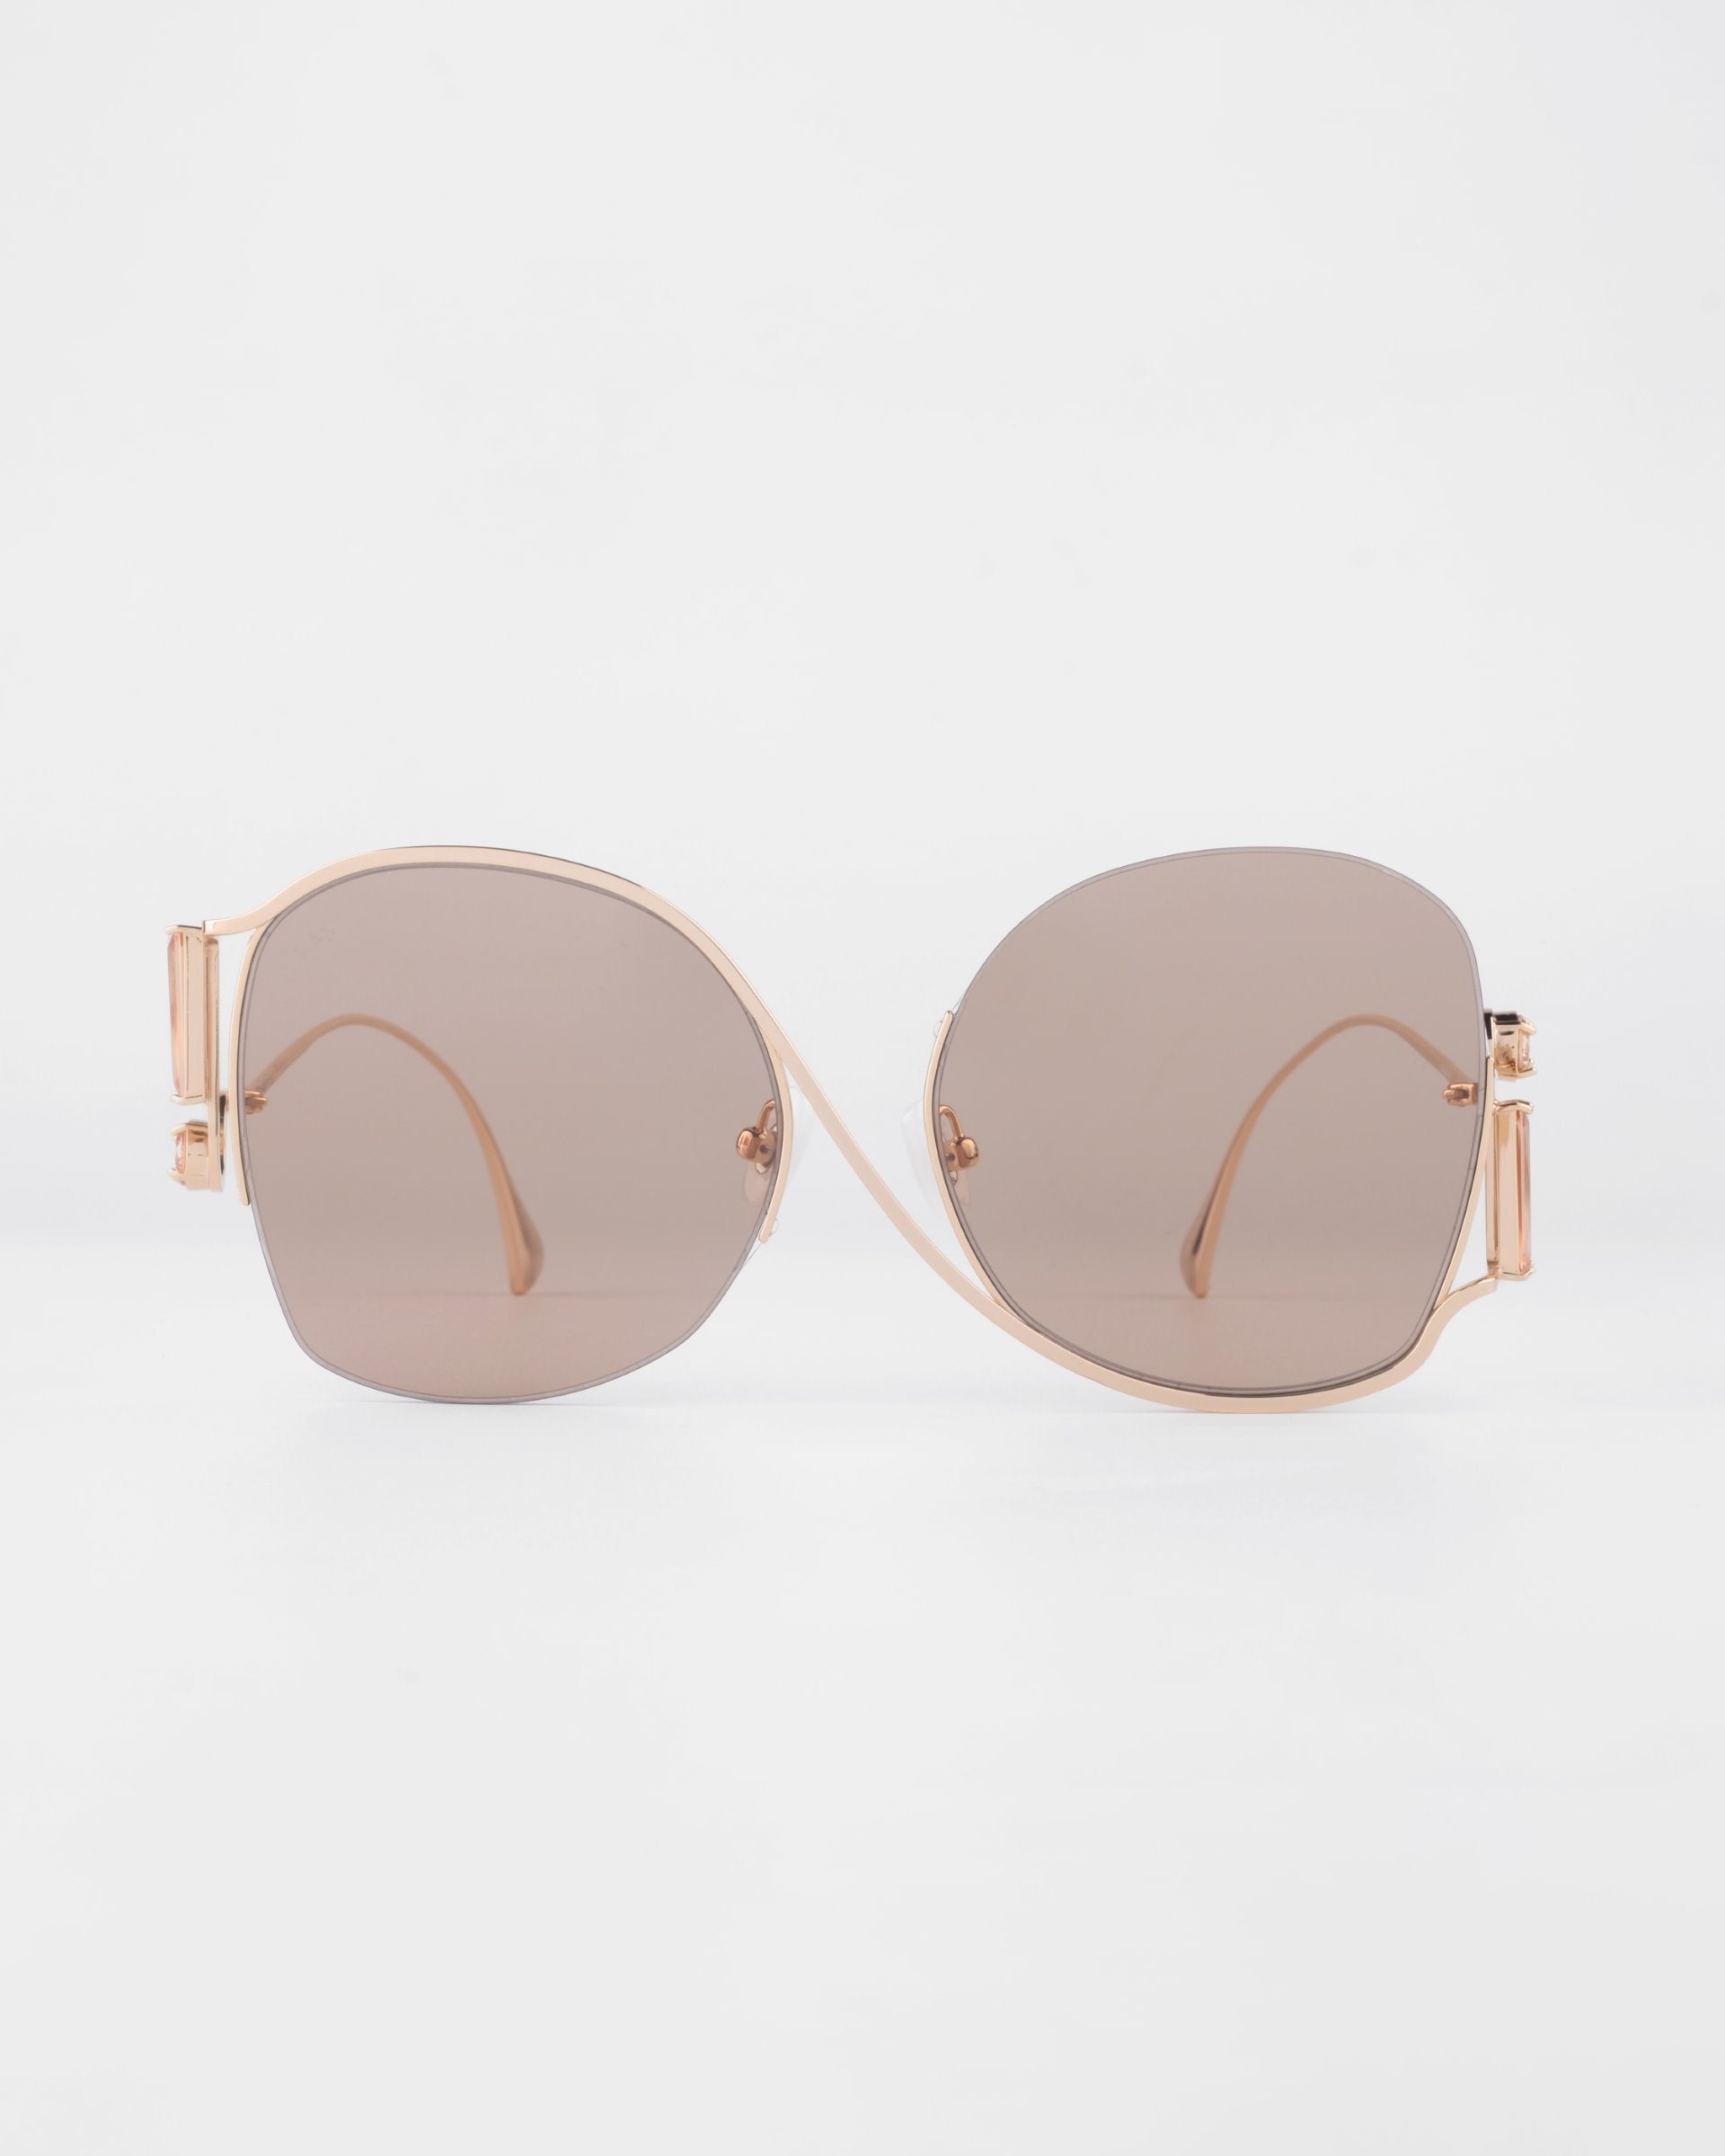 A pair of For Art&#39;s Sake® Sapphire sunglasses with large, light brown lenses and thin, gold-colored frames. The Sapphire sunglasses, offering UV protection, are positioned symmetrically against a plain white background.